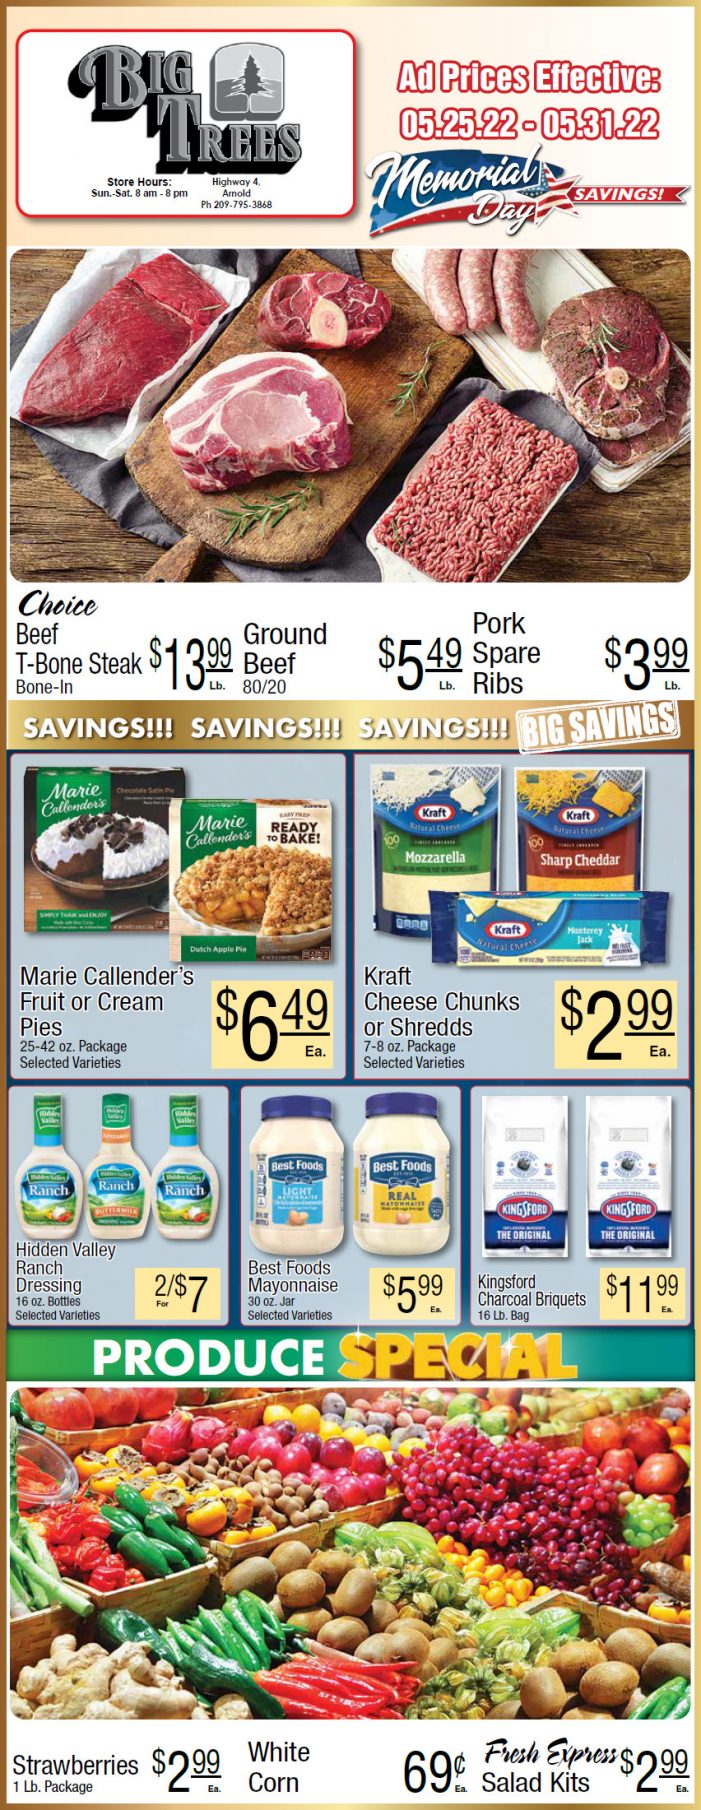 Big Trees Market Weekly Ad & Grocery Specials May 25th Through May 31st! Shop Local & Save!